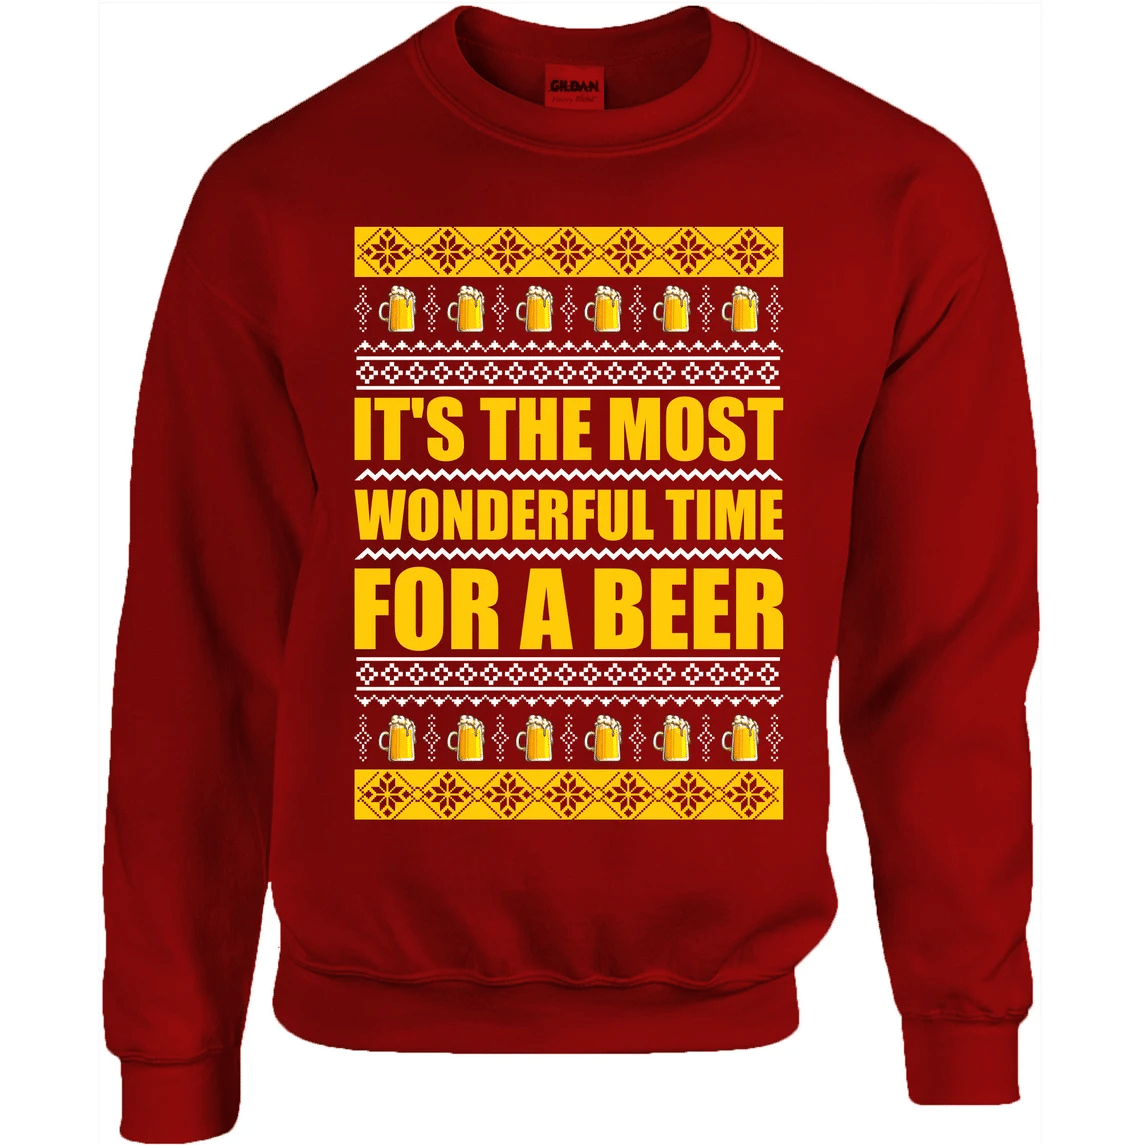 It's The Most Wonderful Time For A Beer Christmas Sweatshirt Style: Sweatshirt, Color: Red